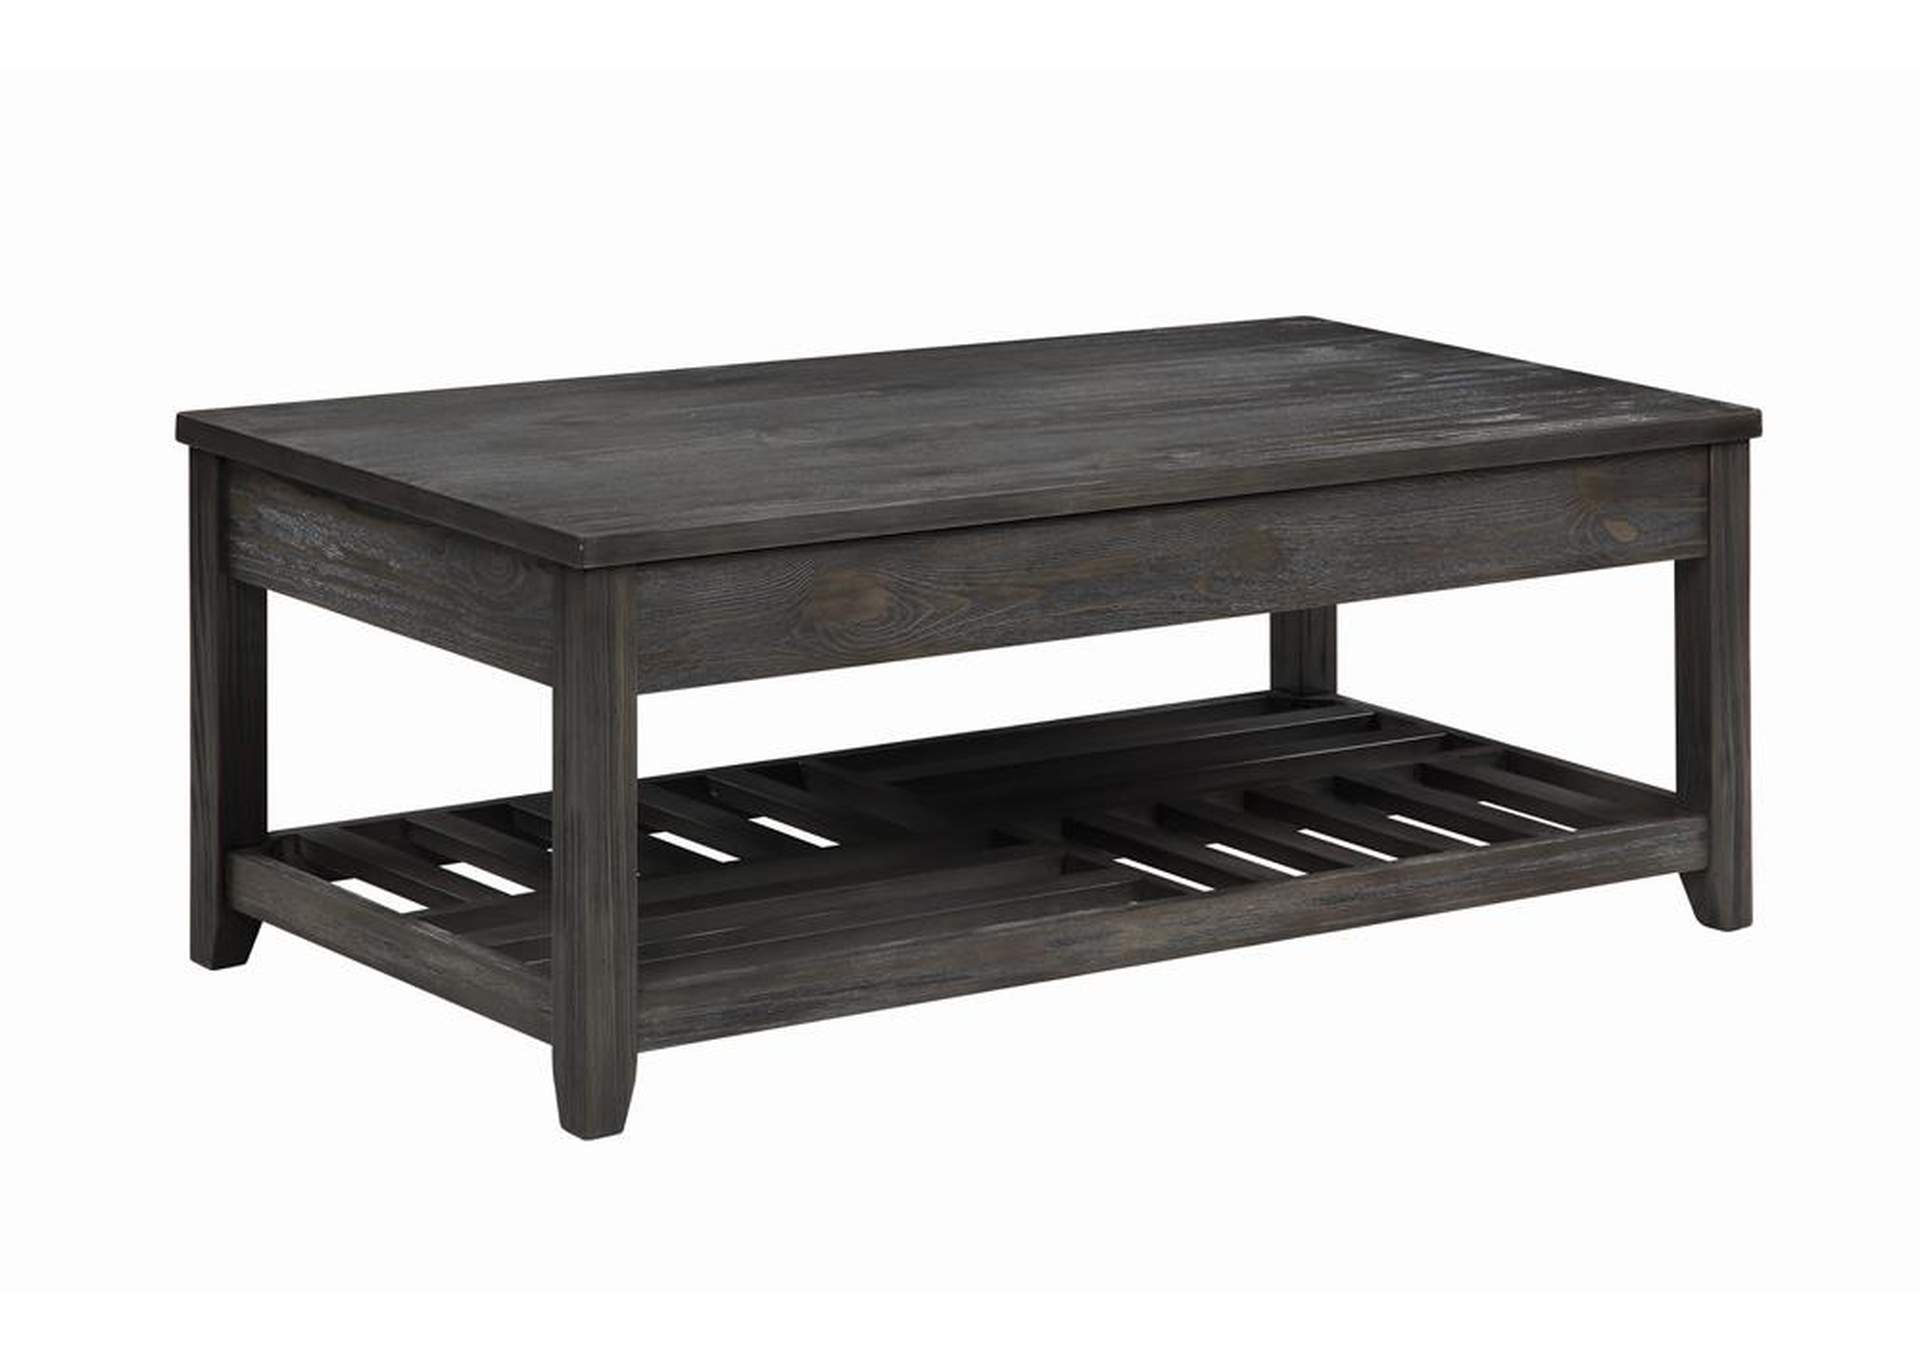 Rustic Grey Lift Top Coffee Table Best Buy Furniture And Mattress